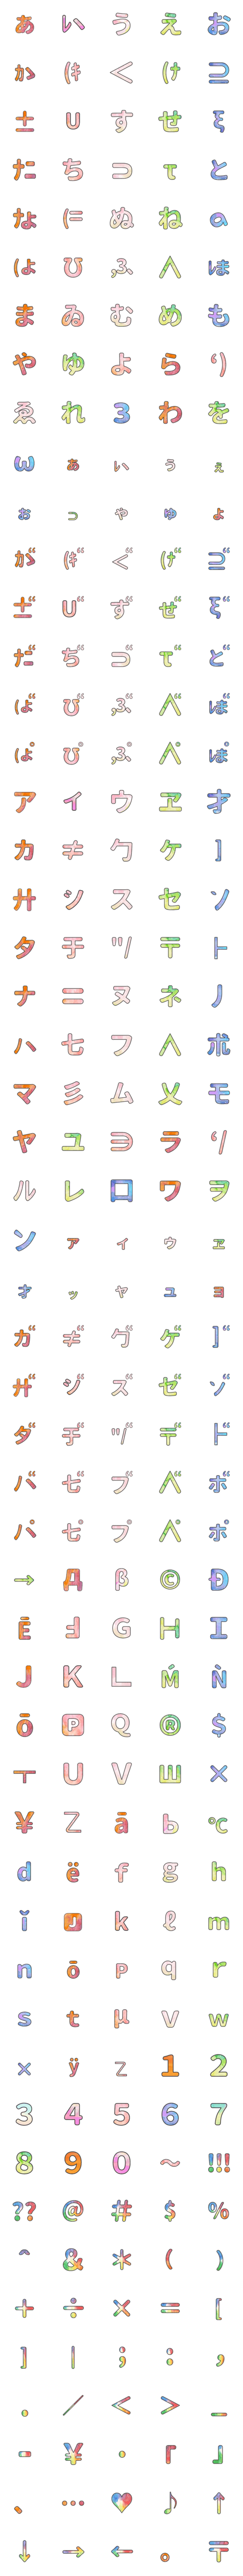 [LINE絵文字]我らのギャル文字の画像一覧